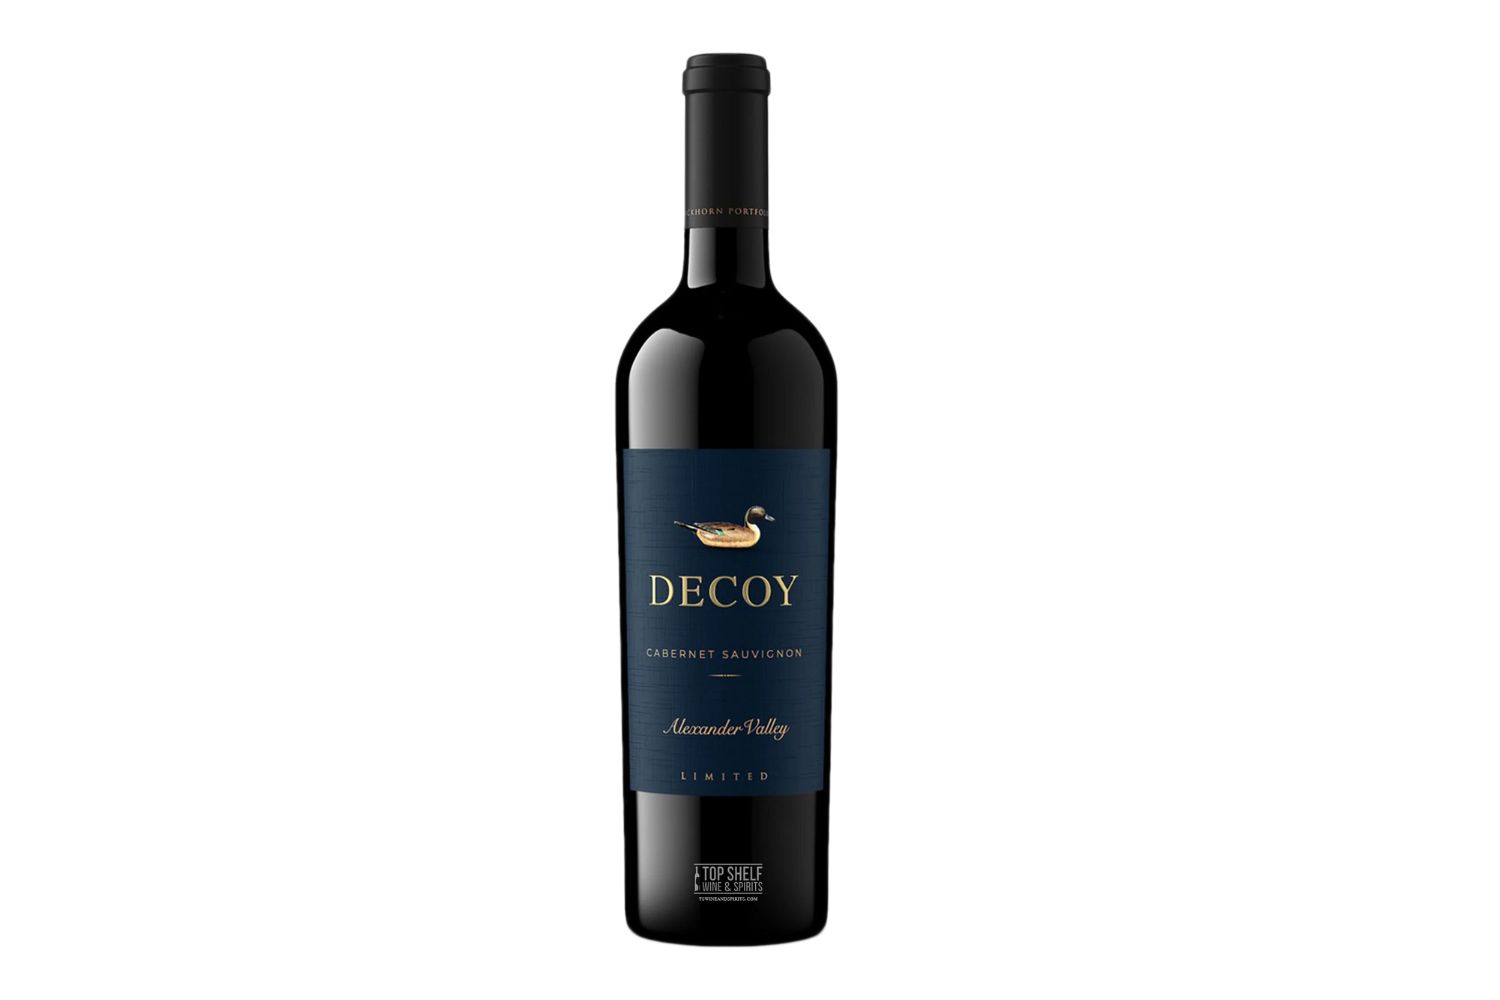 20-mind-blowing-facts-about-decoy-wine